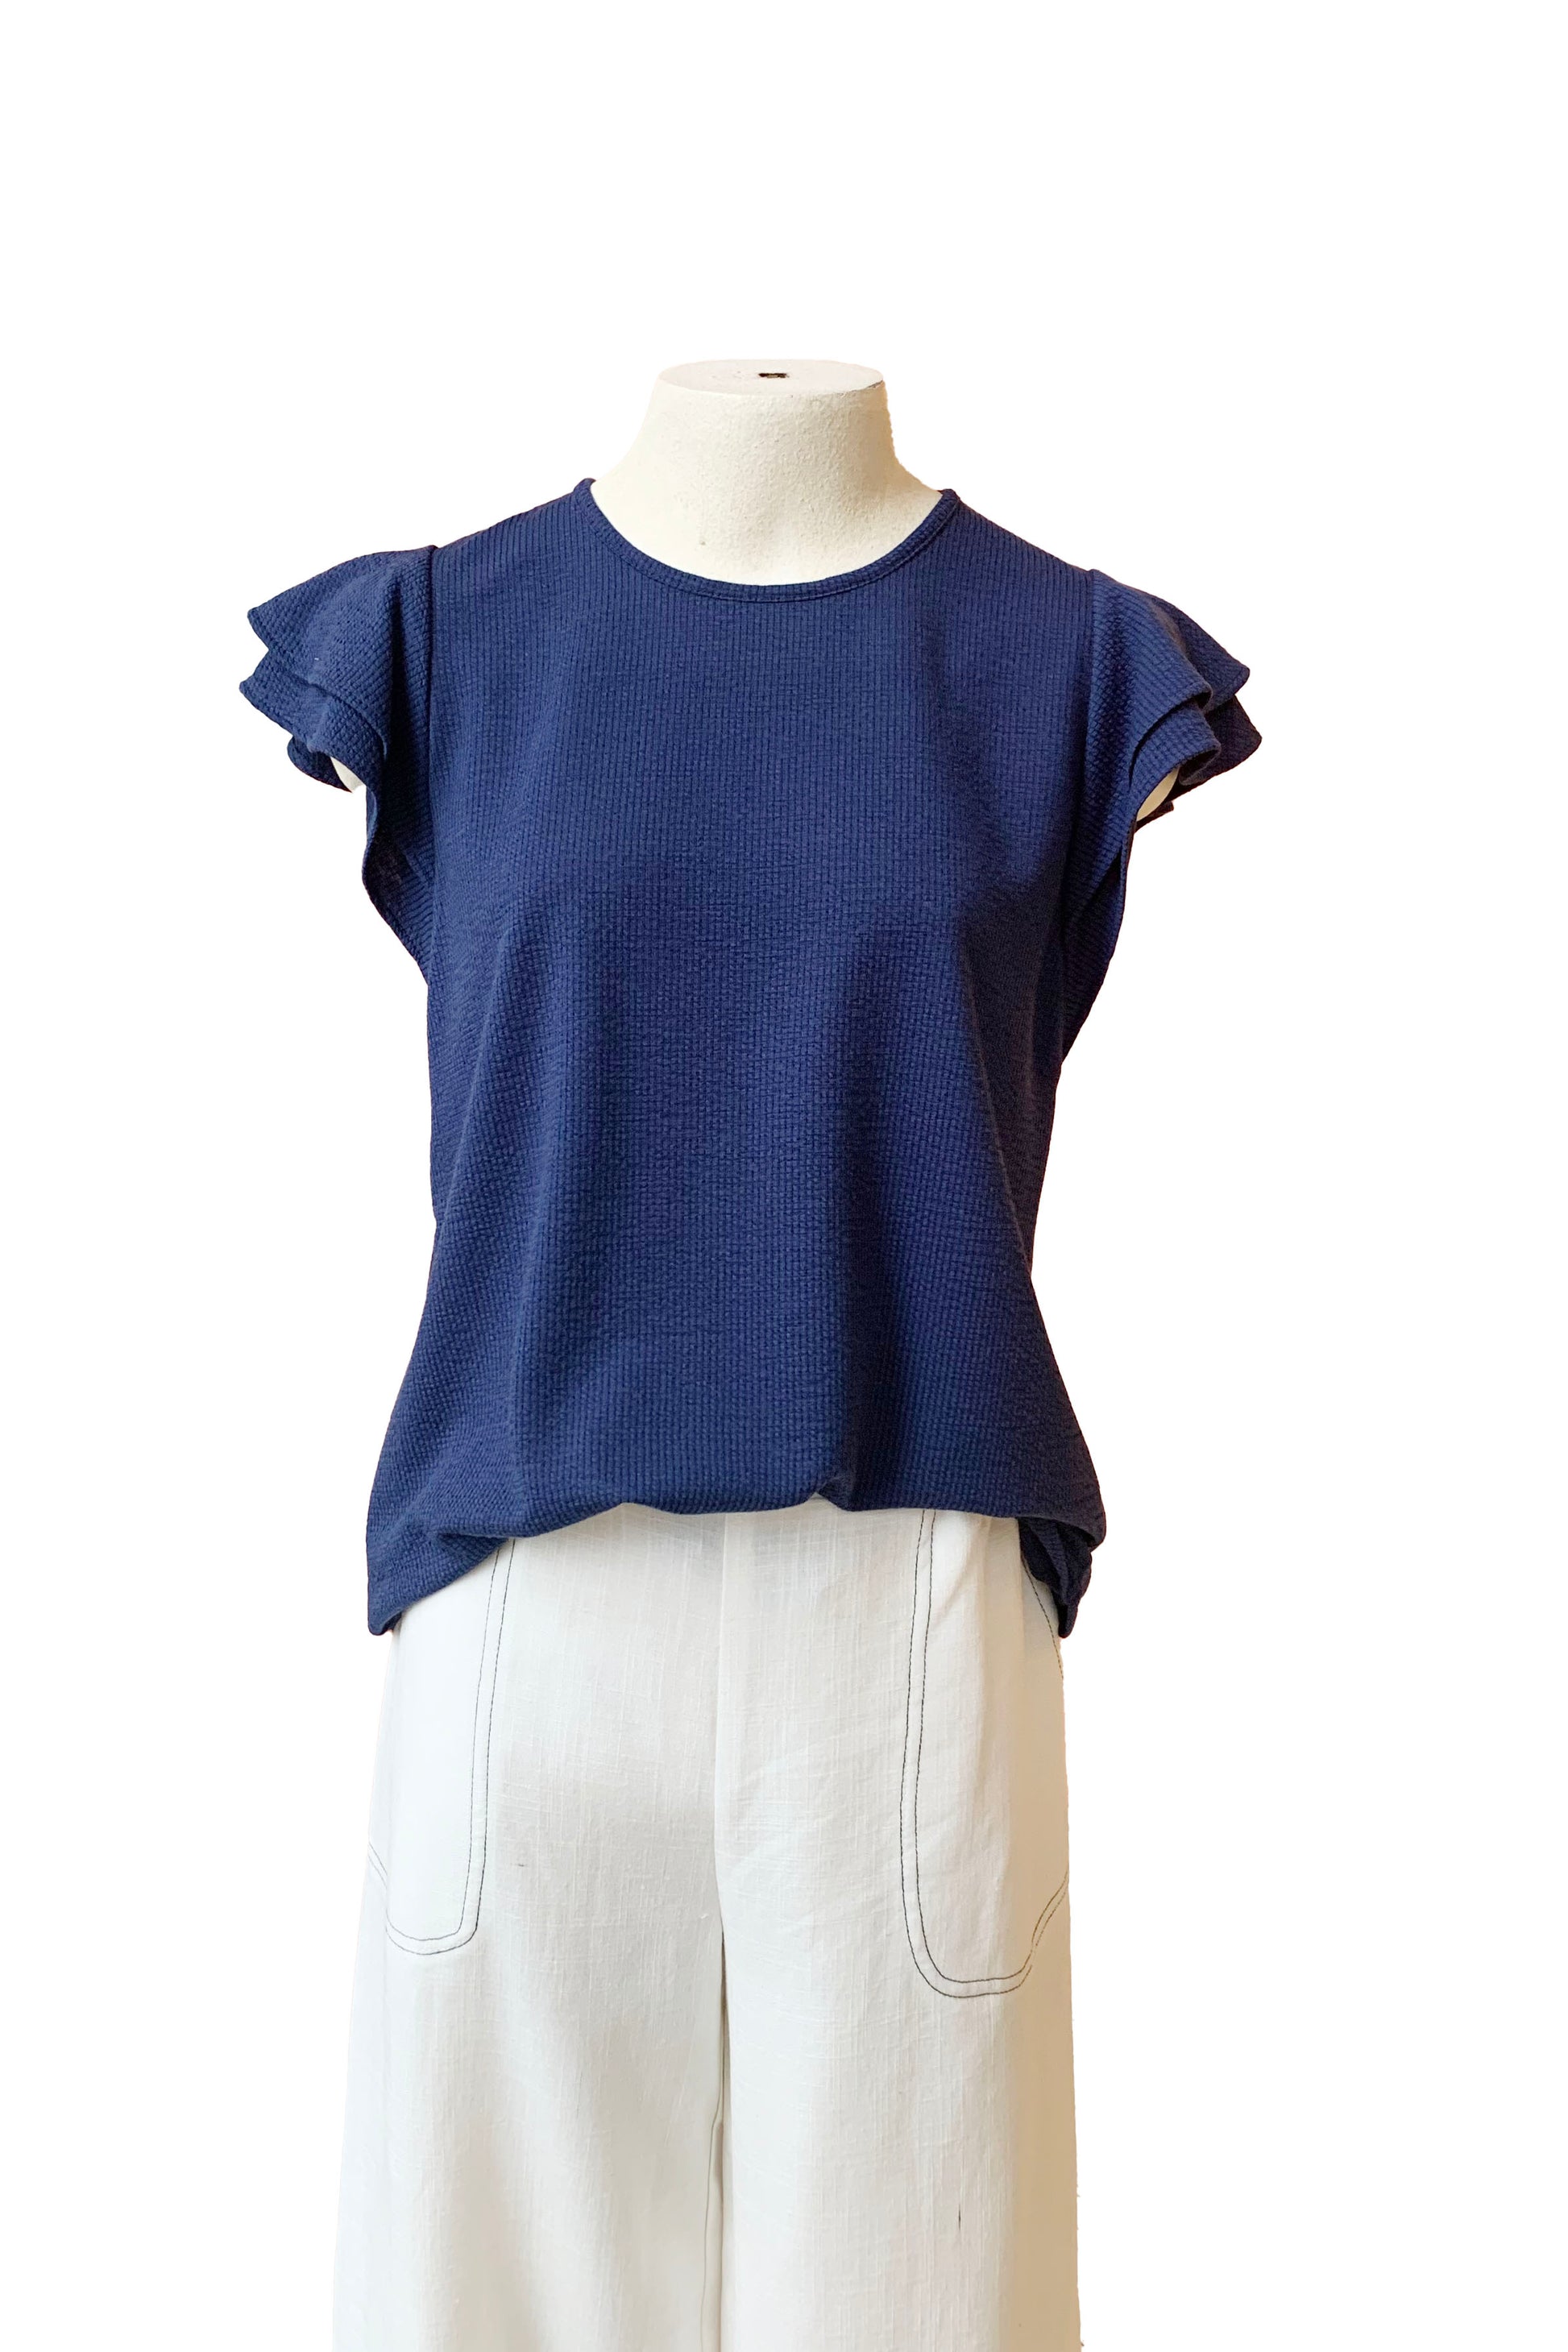 Casper Top by Pure Essence, Navy, ruffles at shoulders, short sleeves, round neck, slightly fitted shape, sizes XS to XXL, made in Canada